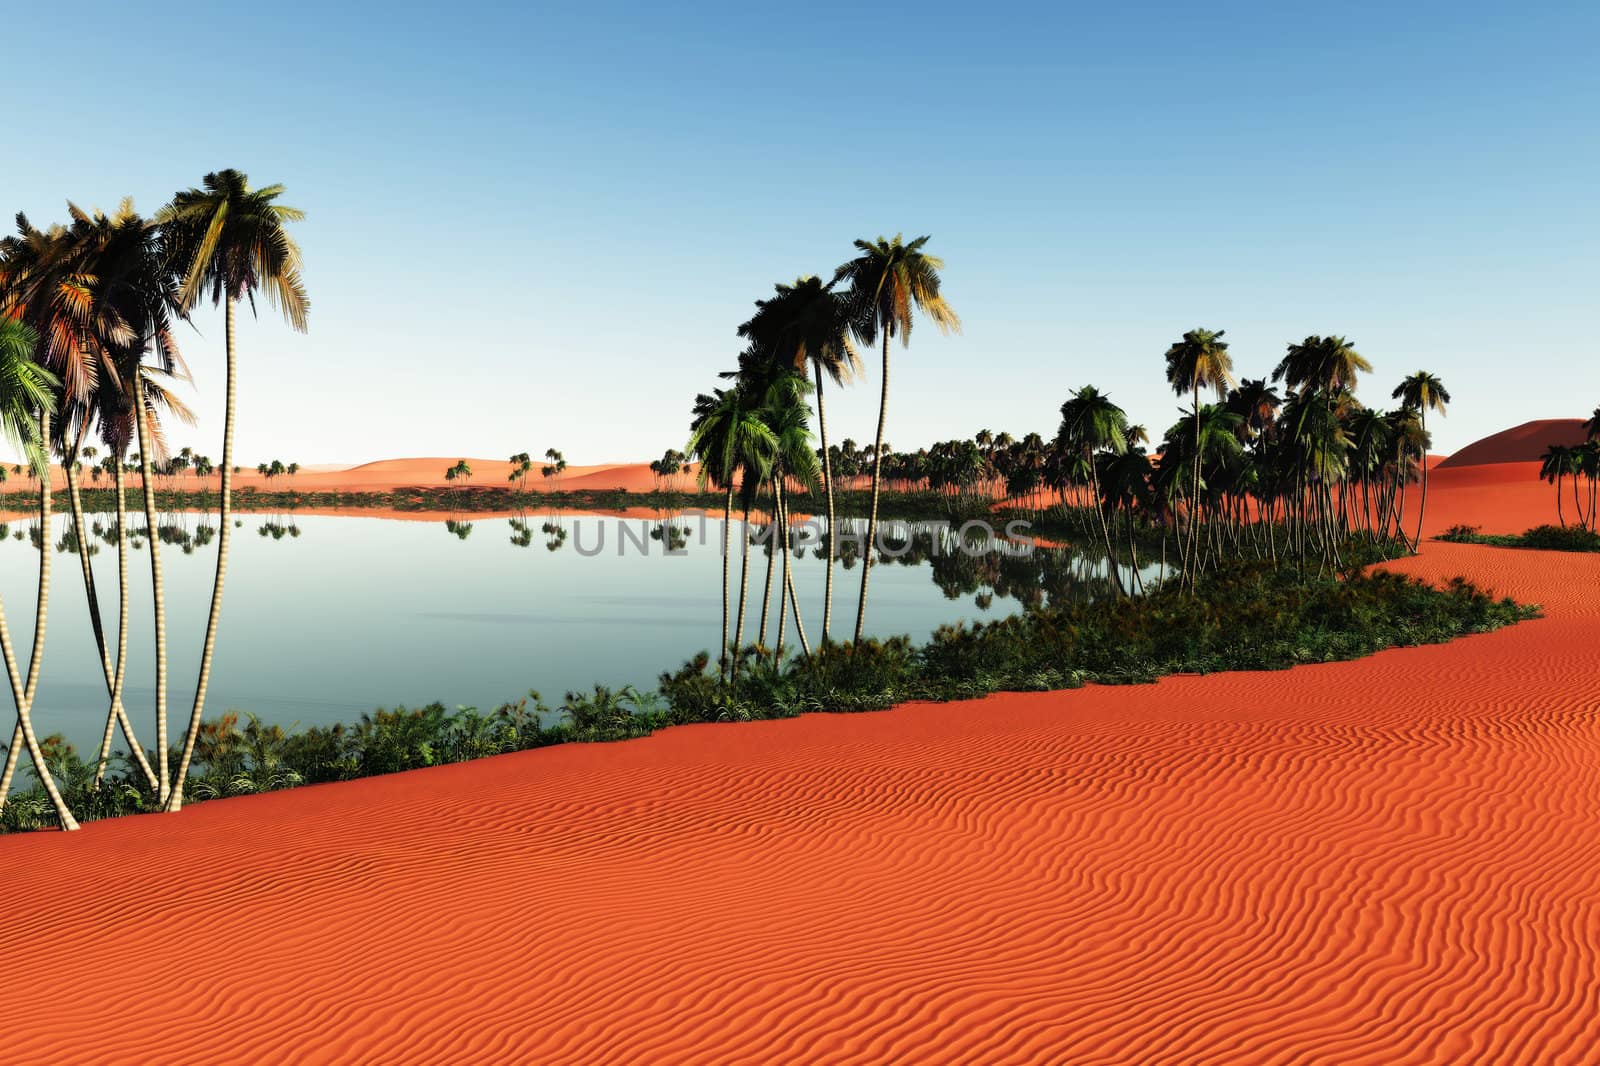 Landscape picture of a beautiful Sahara with a small lake and palm trees